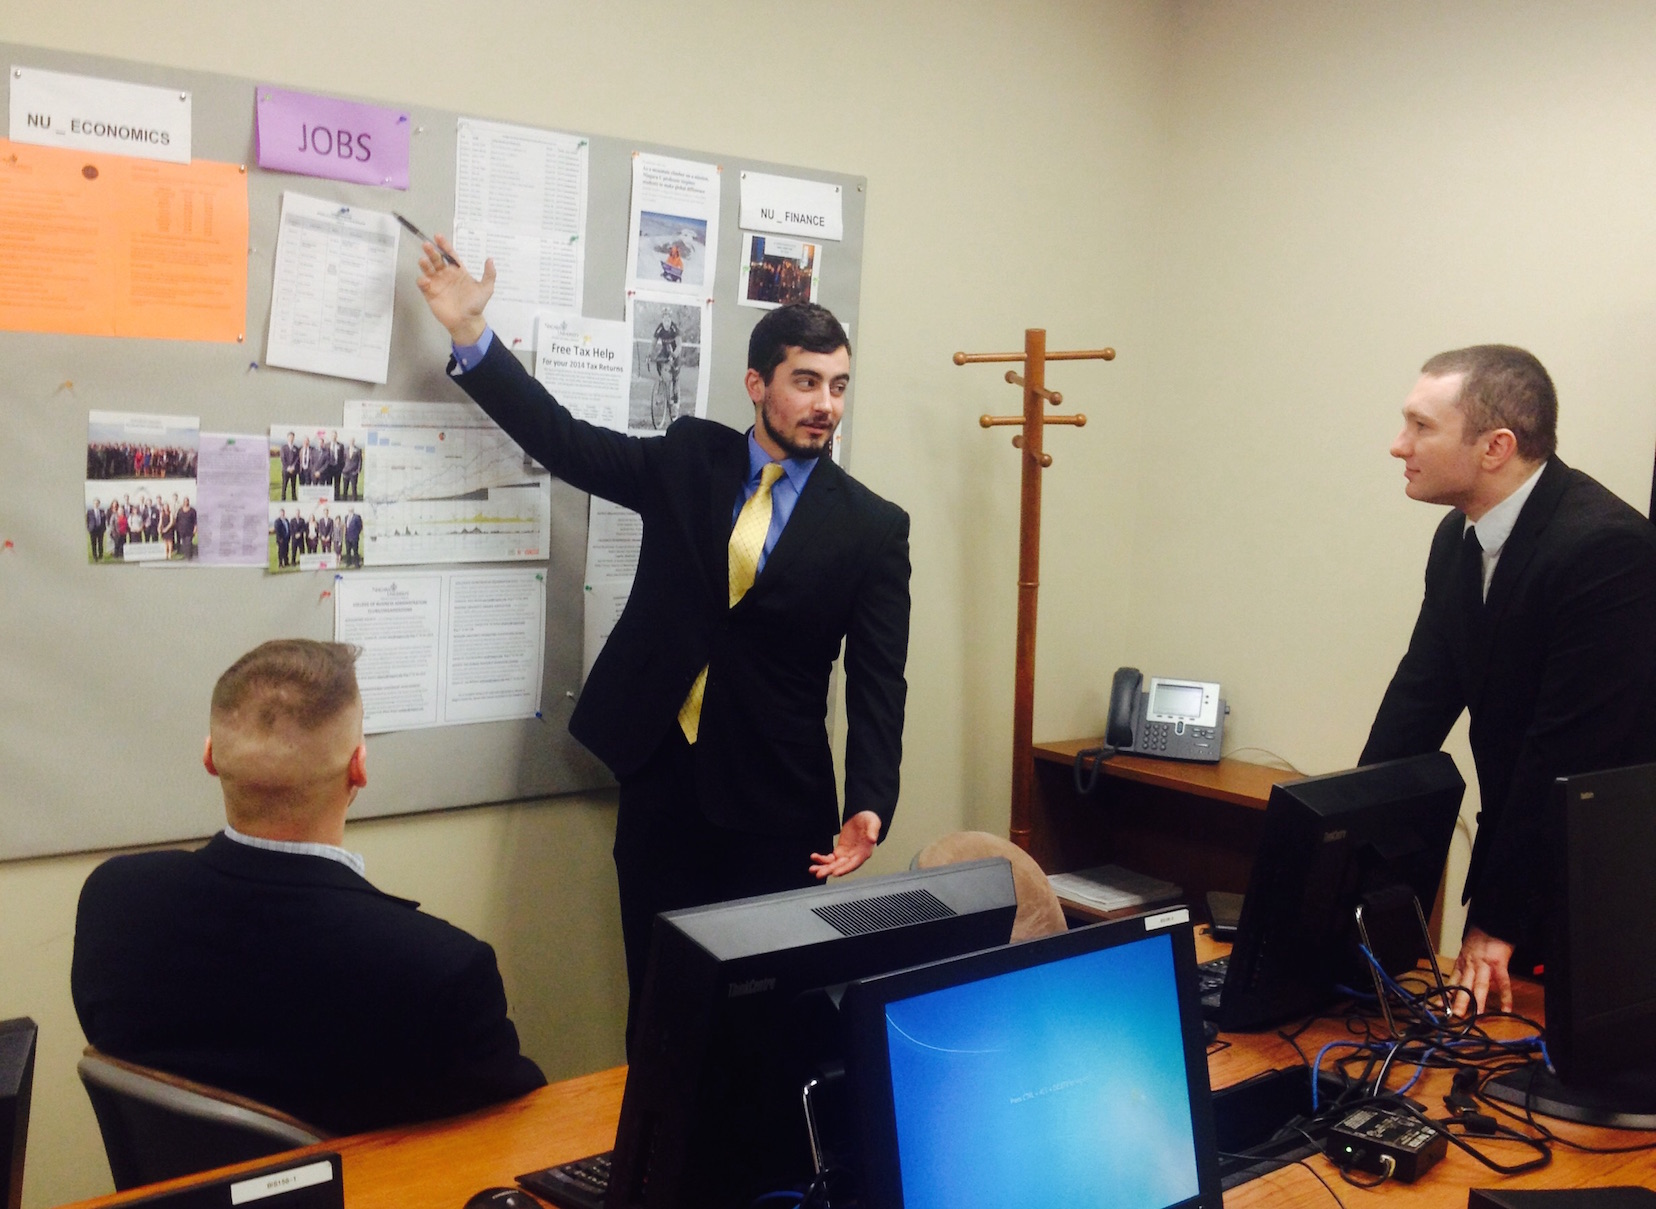 `Niagara students discussing the President's State of the Union Address in Bisgrove Hall`
From Left to Right- Soph. Jake Cary, Fresh. Alex Daddone, Jun. Casey Rebovich.